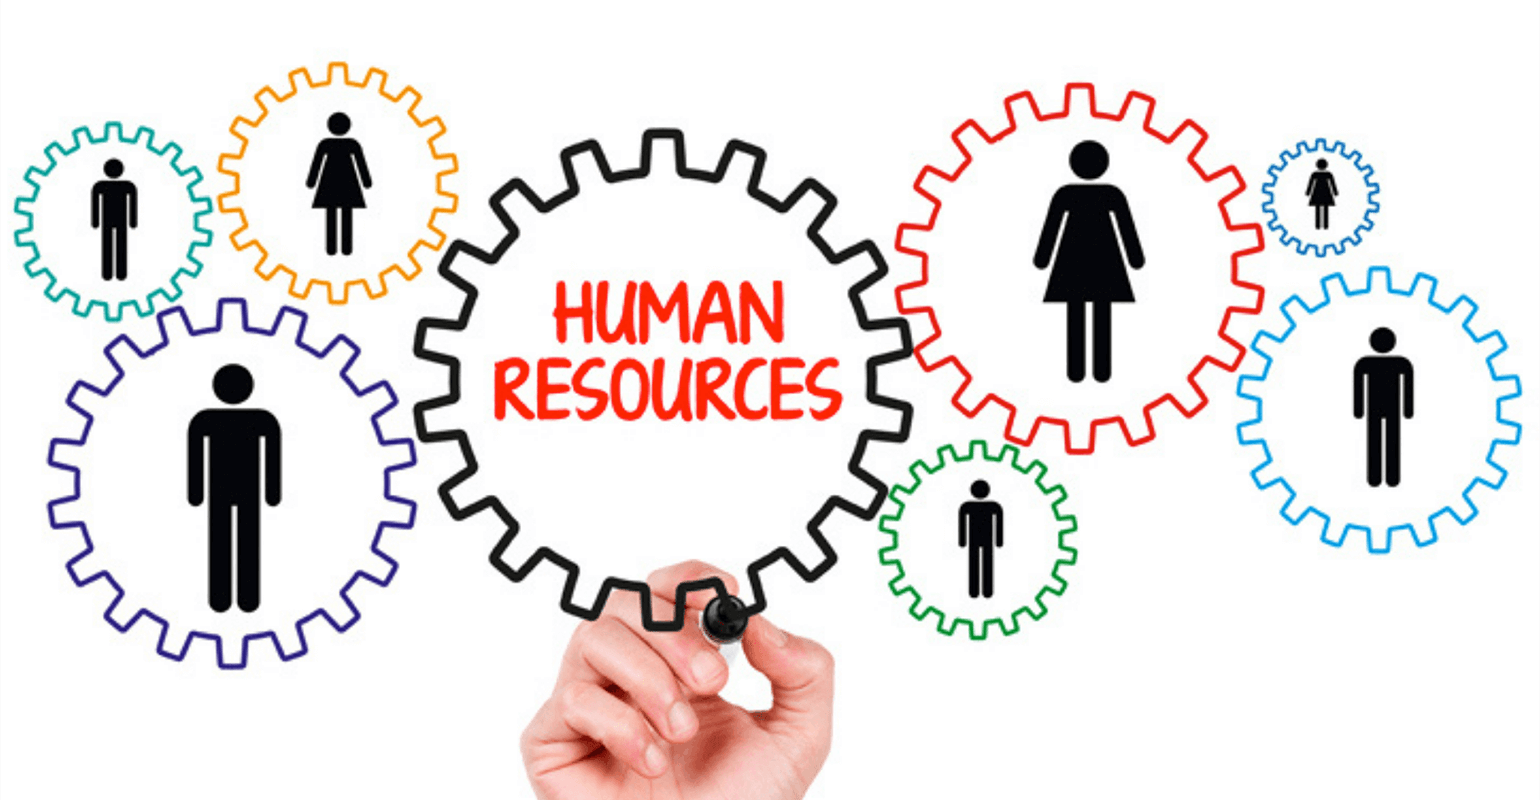 An image of a hand drawing a black cog. Inside the cog the words 'human resources' are written in red. There are 7 other colored cogs, 3 to the left and 4 to the right. In each of the colored cogs there is an icon of a person.